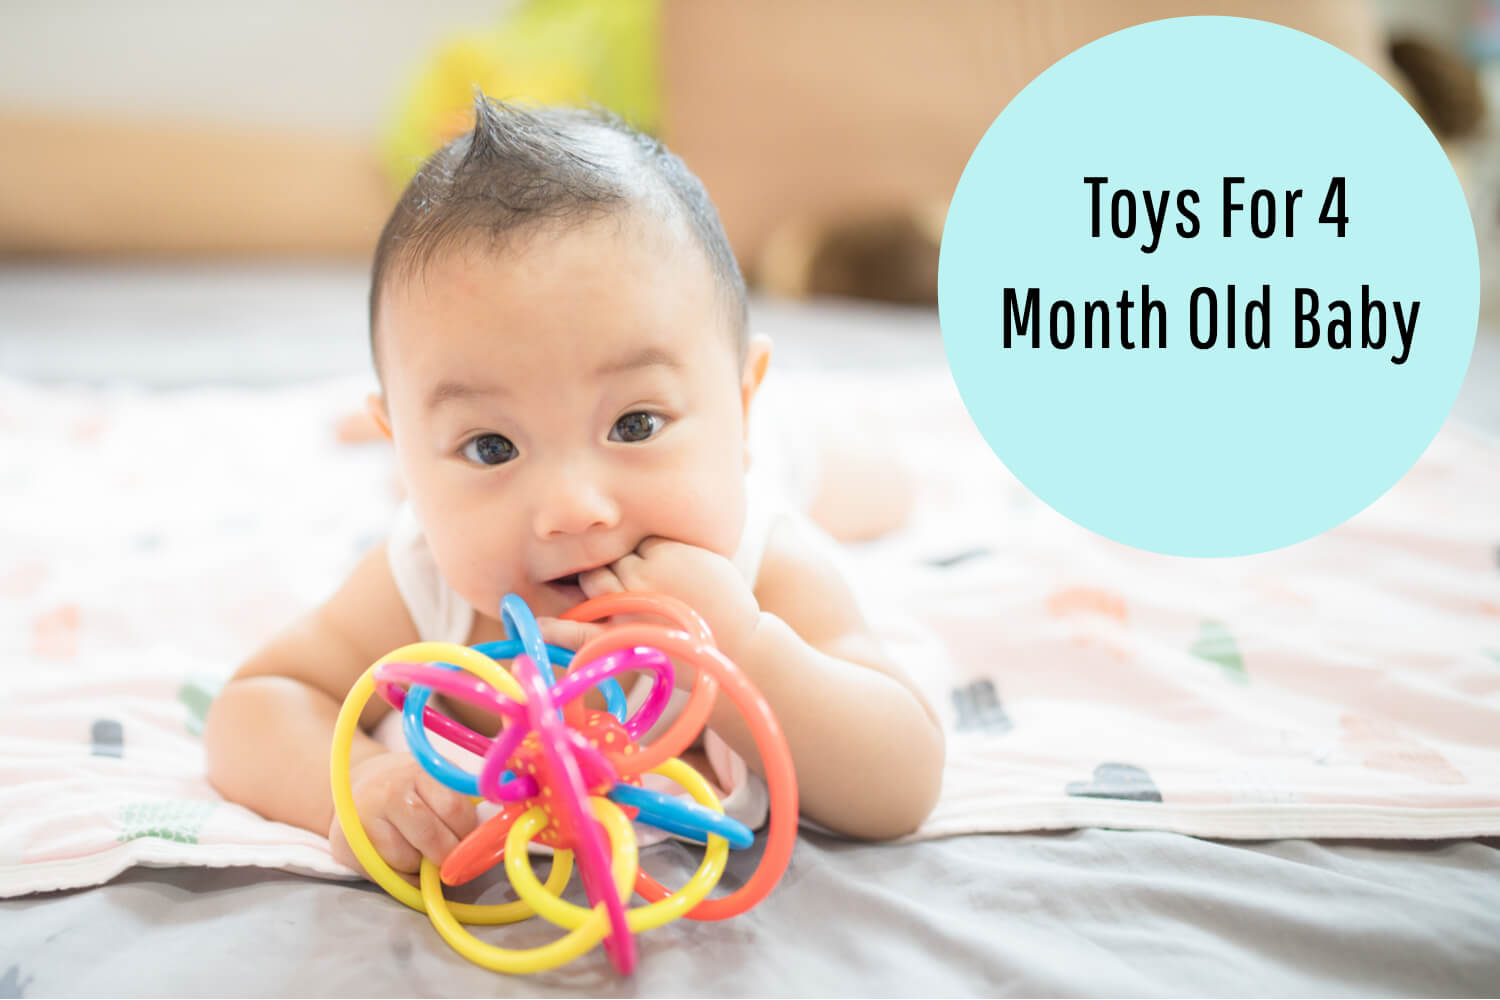 Toys For 4 Month Old Baby